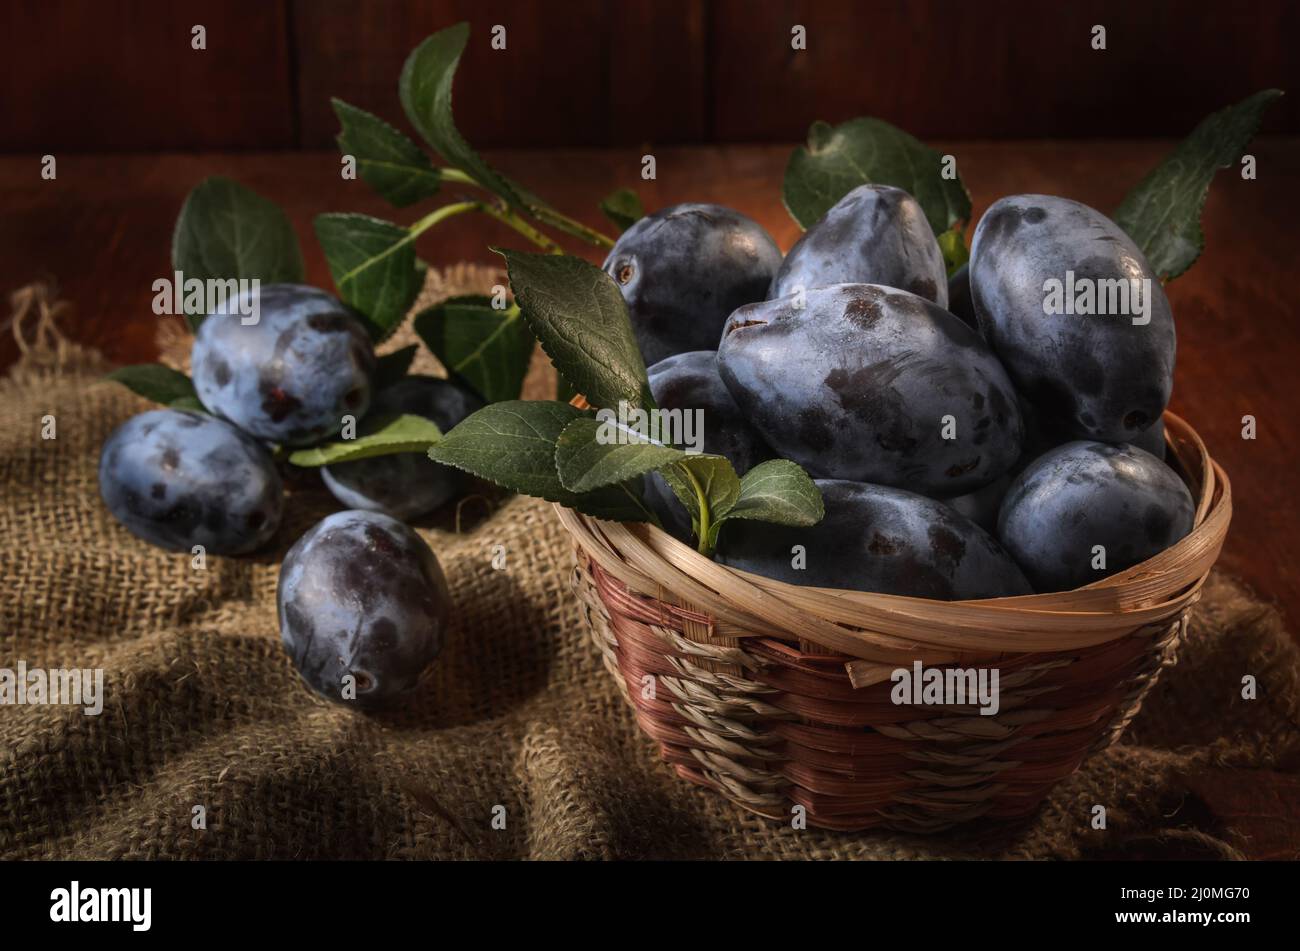 Plum in a basket on a dark wooden background in a rustic style Stock Photo